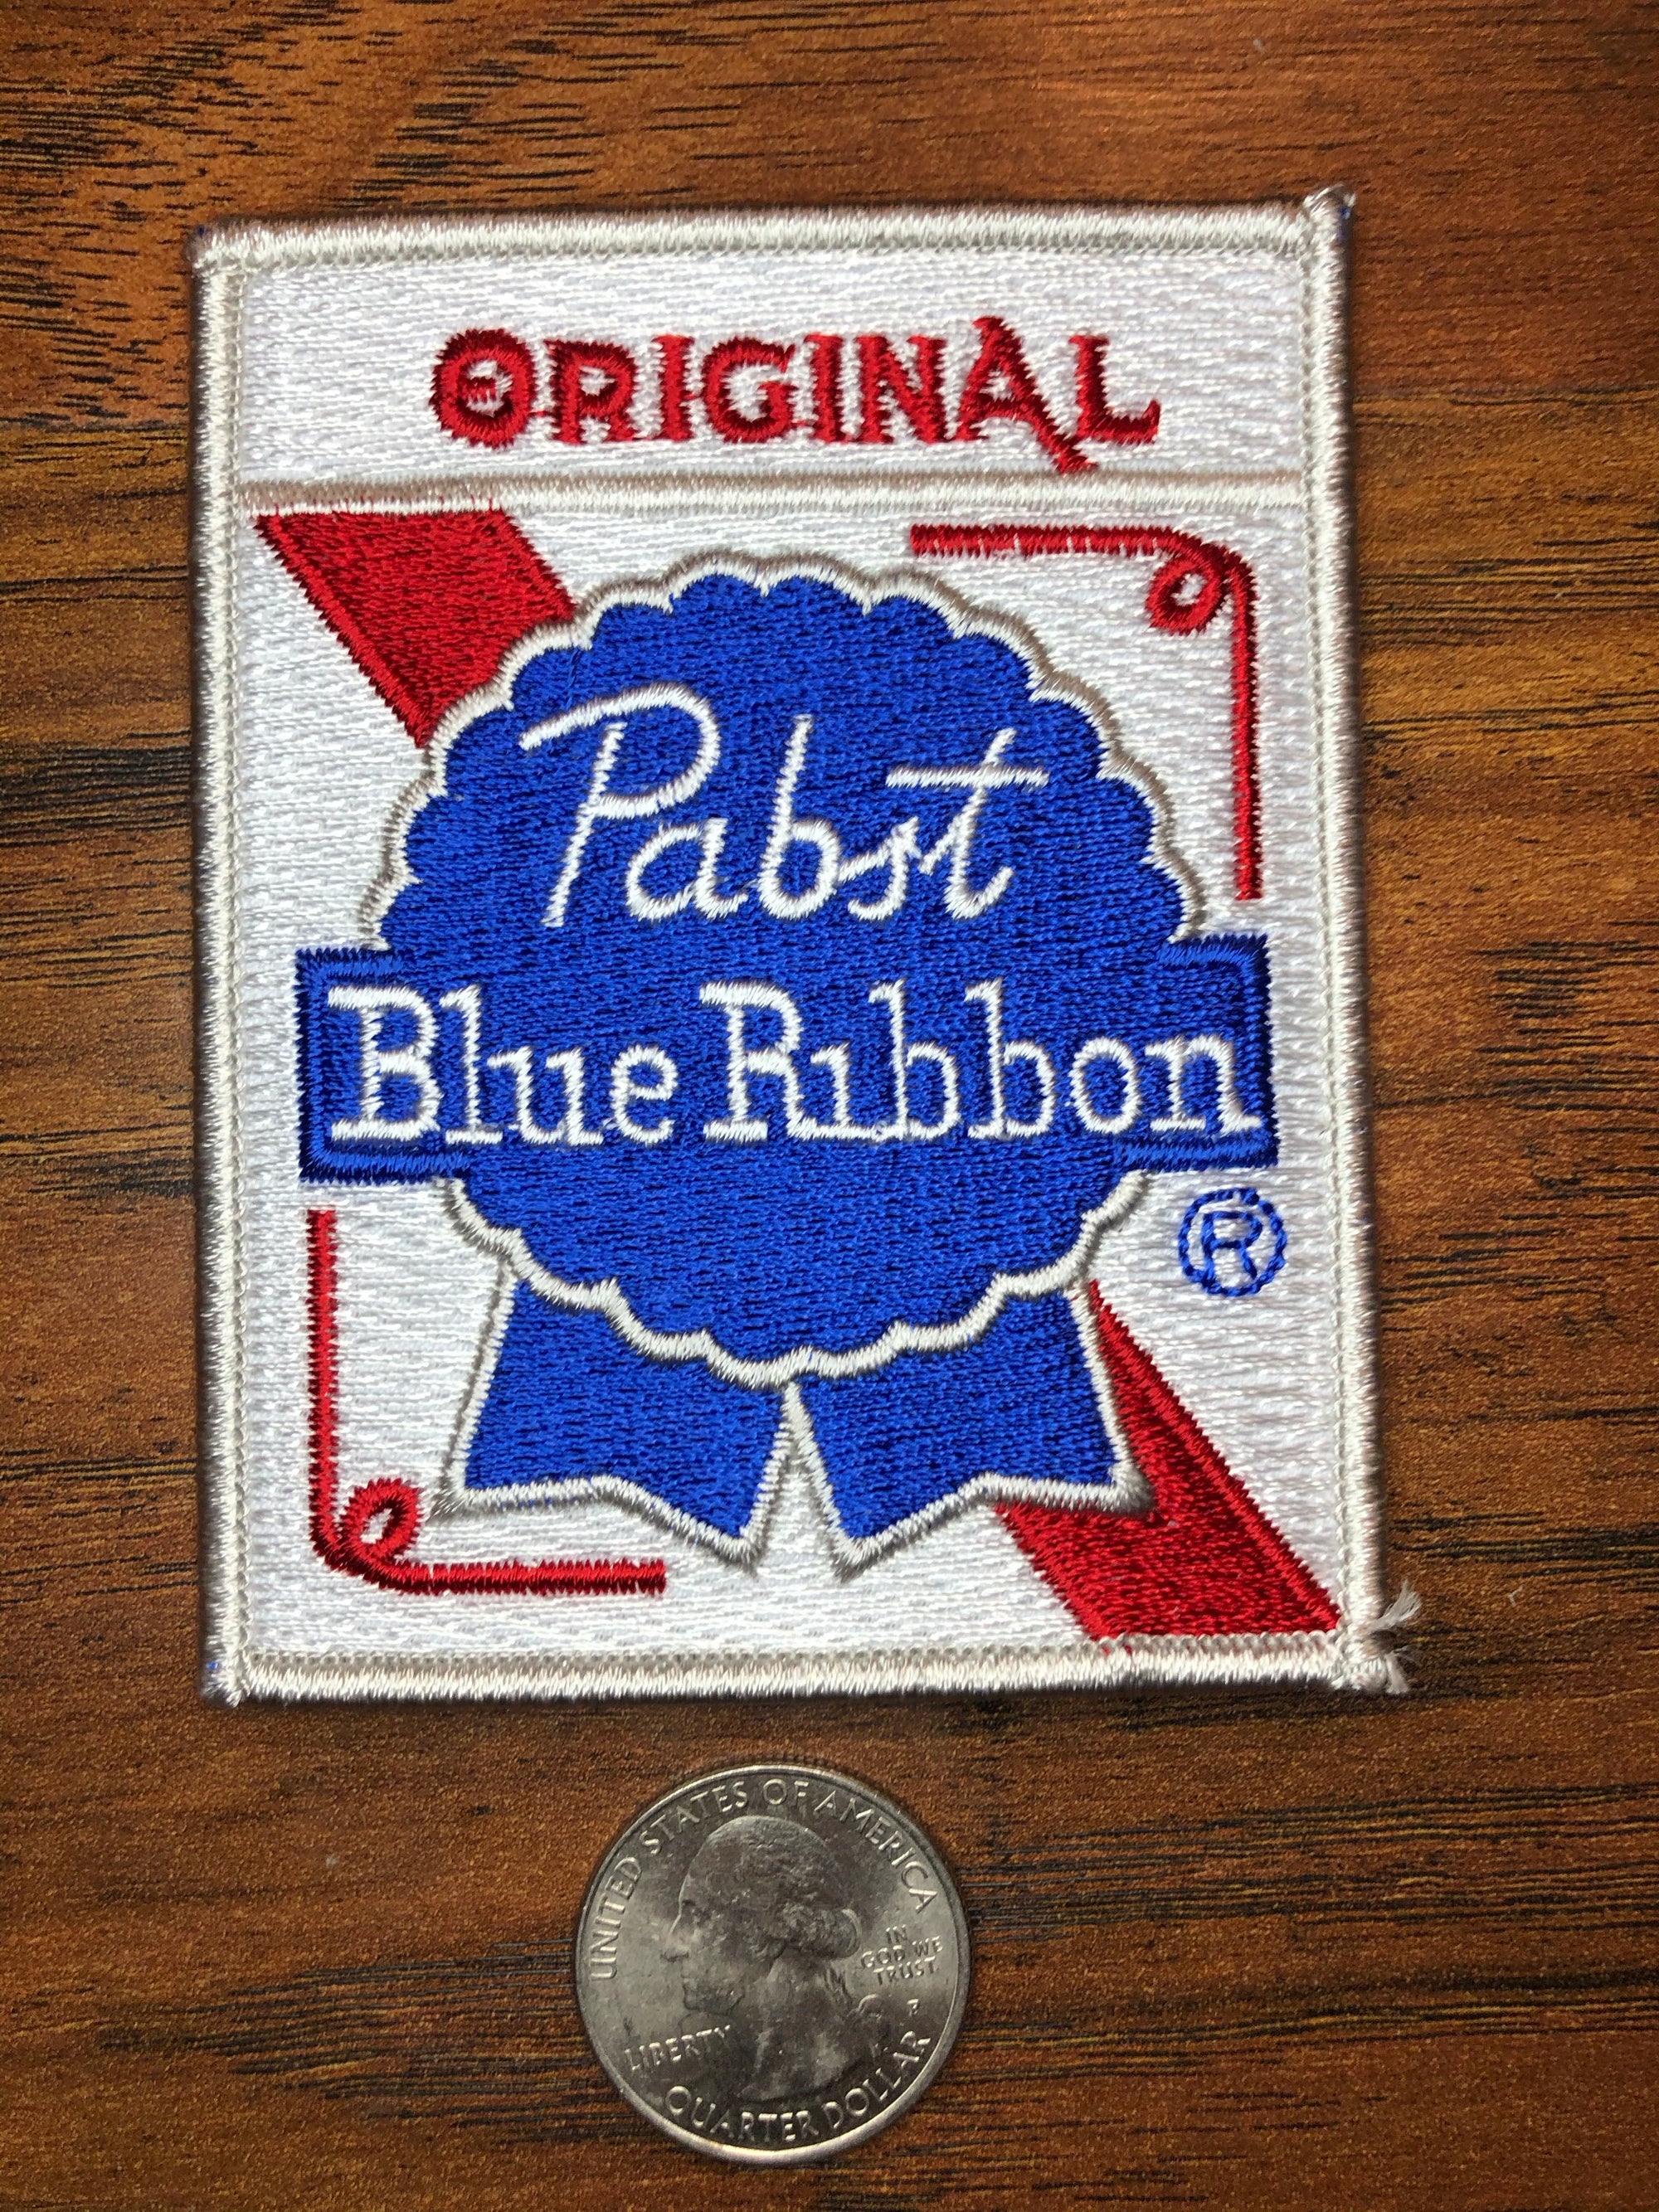 Pabst Blue Ribbon (VERY LARGE)